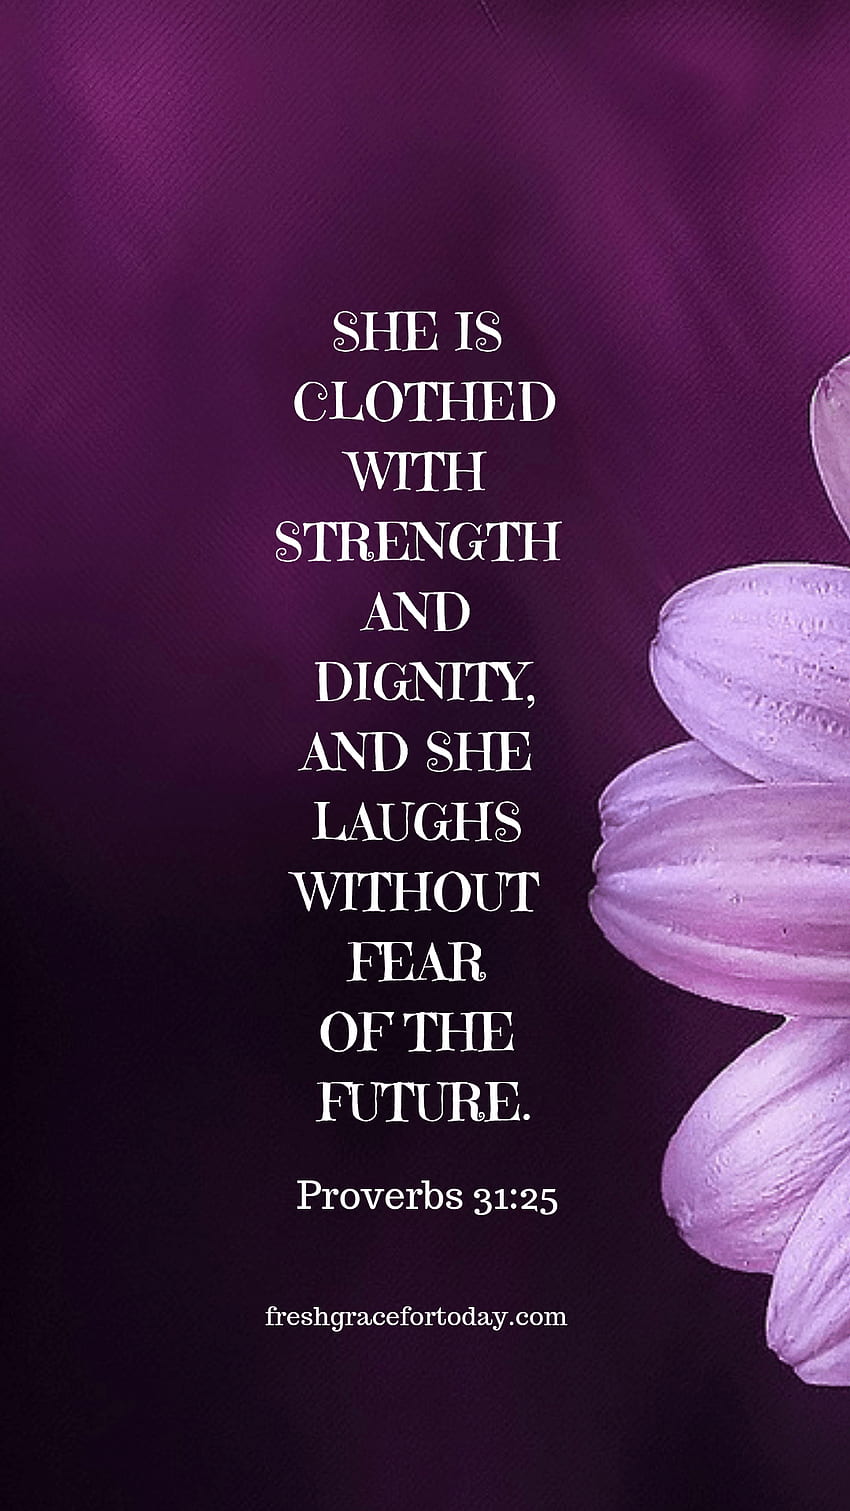 Christian Resources. Fresh Grace for Today, Proverbs 31 HD phone wallpaper